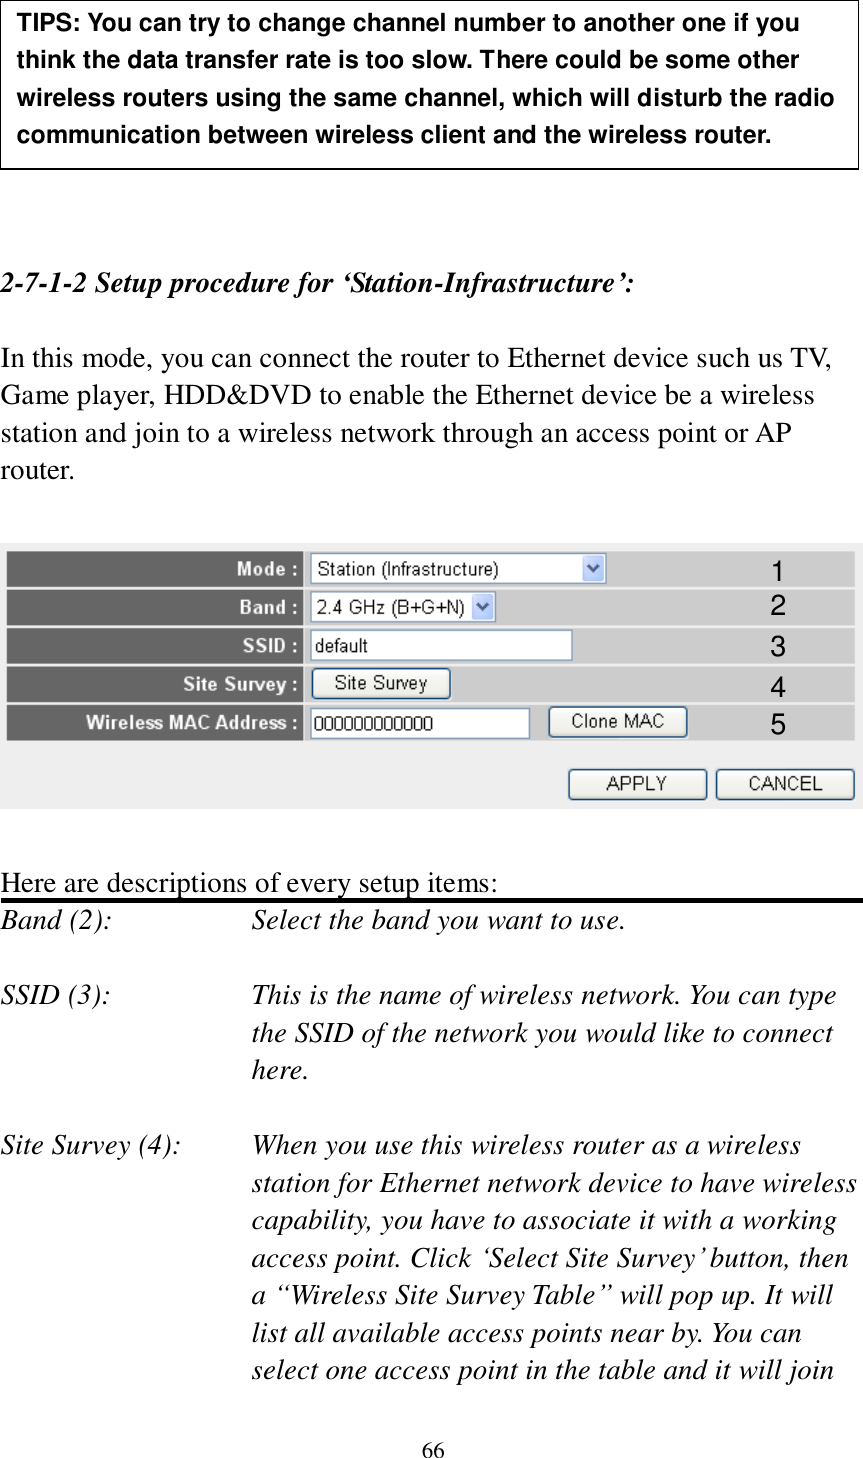 66         2-7-1-2 Setup procedure for ‘Station-Infrastructure’:  In this mode, you can connect the router to Ethernet device such us TV, Game player, HDD&amp;DVD to enable the Ethernet device be a wireless station and join to a wireless network through an access point or AP router.    Here are descriptions of every setup items: Band (2):  Select the band you want to use.  SSID (3):  This is the name of wireless network. You can type the SSID of the network you would like to connect here.  Site Survey (4):  When you use this wireless router as a wireless station for Ethernet network device to have wireless capability, you have to associate it with a working access point. Click „Select Site Survey‟ button, then a “Wireless Site Survey Table” will pop up. It will list all available access points near by. You can select one access point in the table and it will join TIPS: You can try to change channel number to another one if you think the data transfer rate is too slow. There could be some other wireless routers using the same channel, which will disturb the radio communication between wireless client and the wireless router. 1 2 3 4 5 